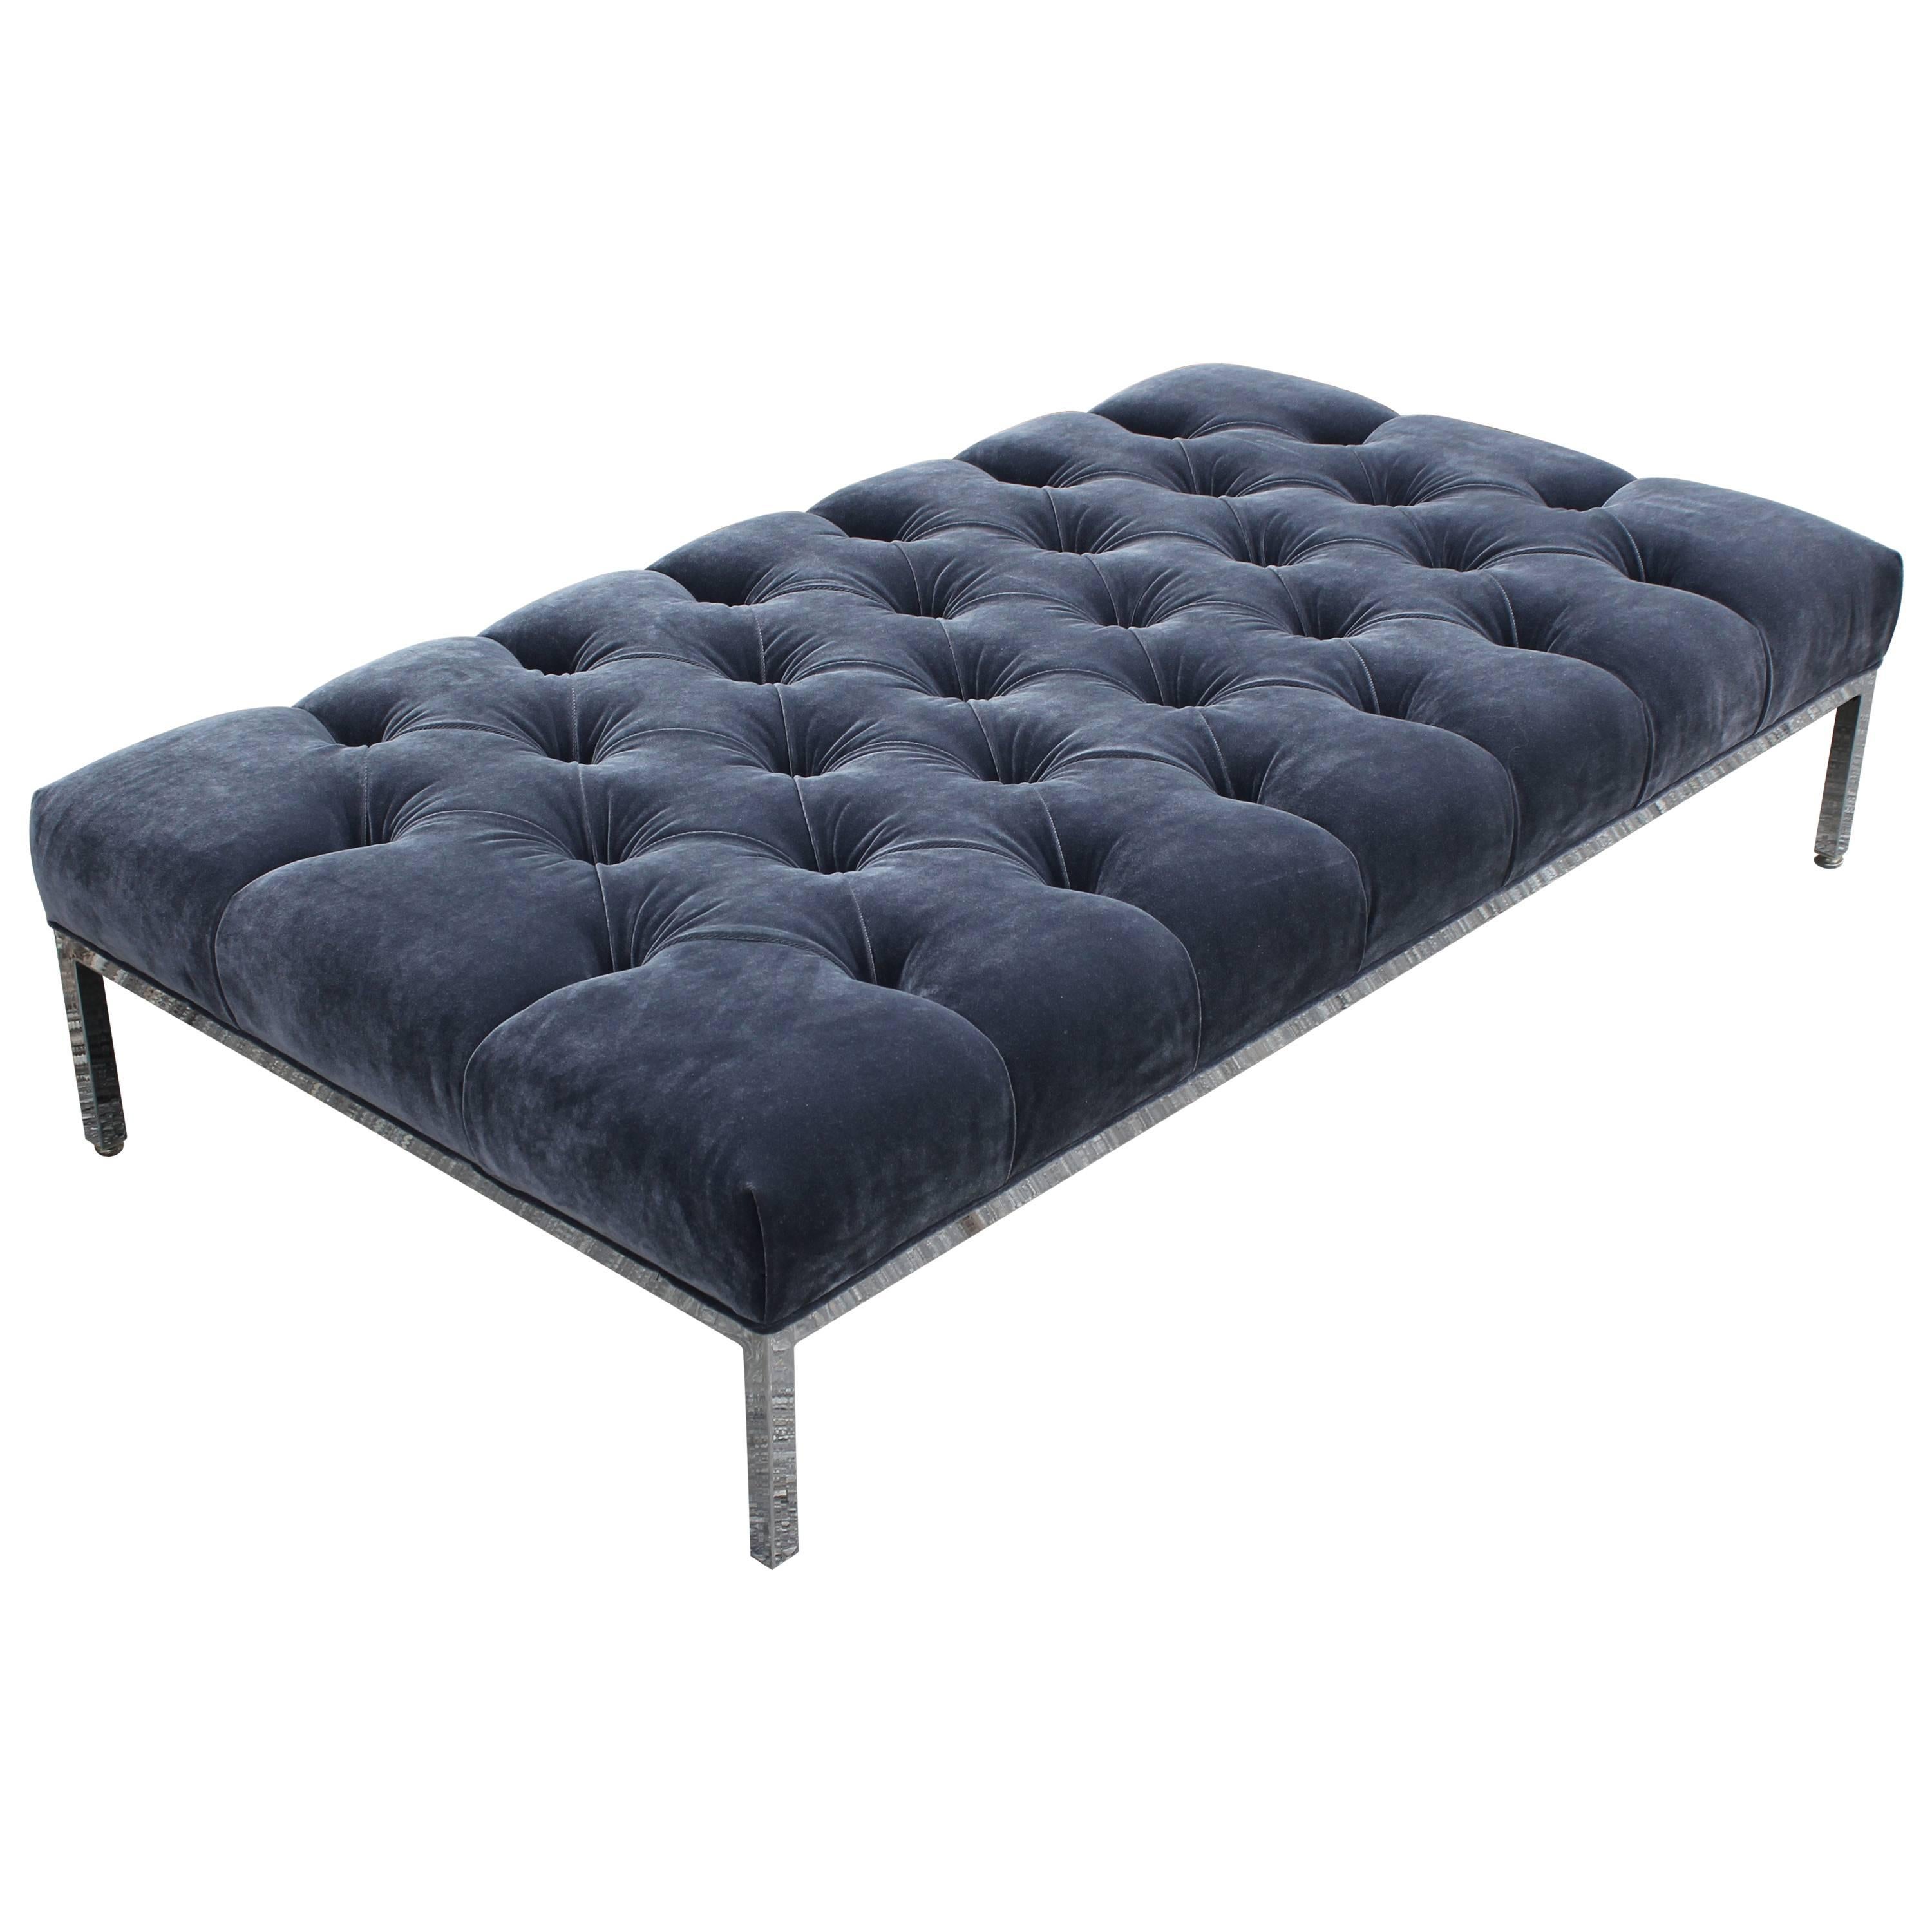 Modern Deeply Tufted Grey Velvet Ottoman Bench / Coffee Table with Chrome Base